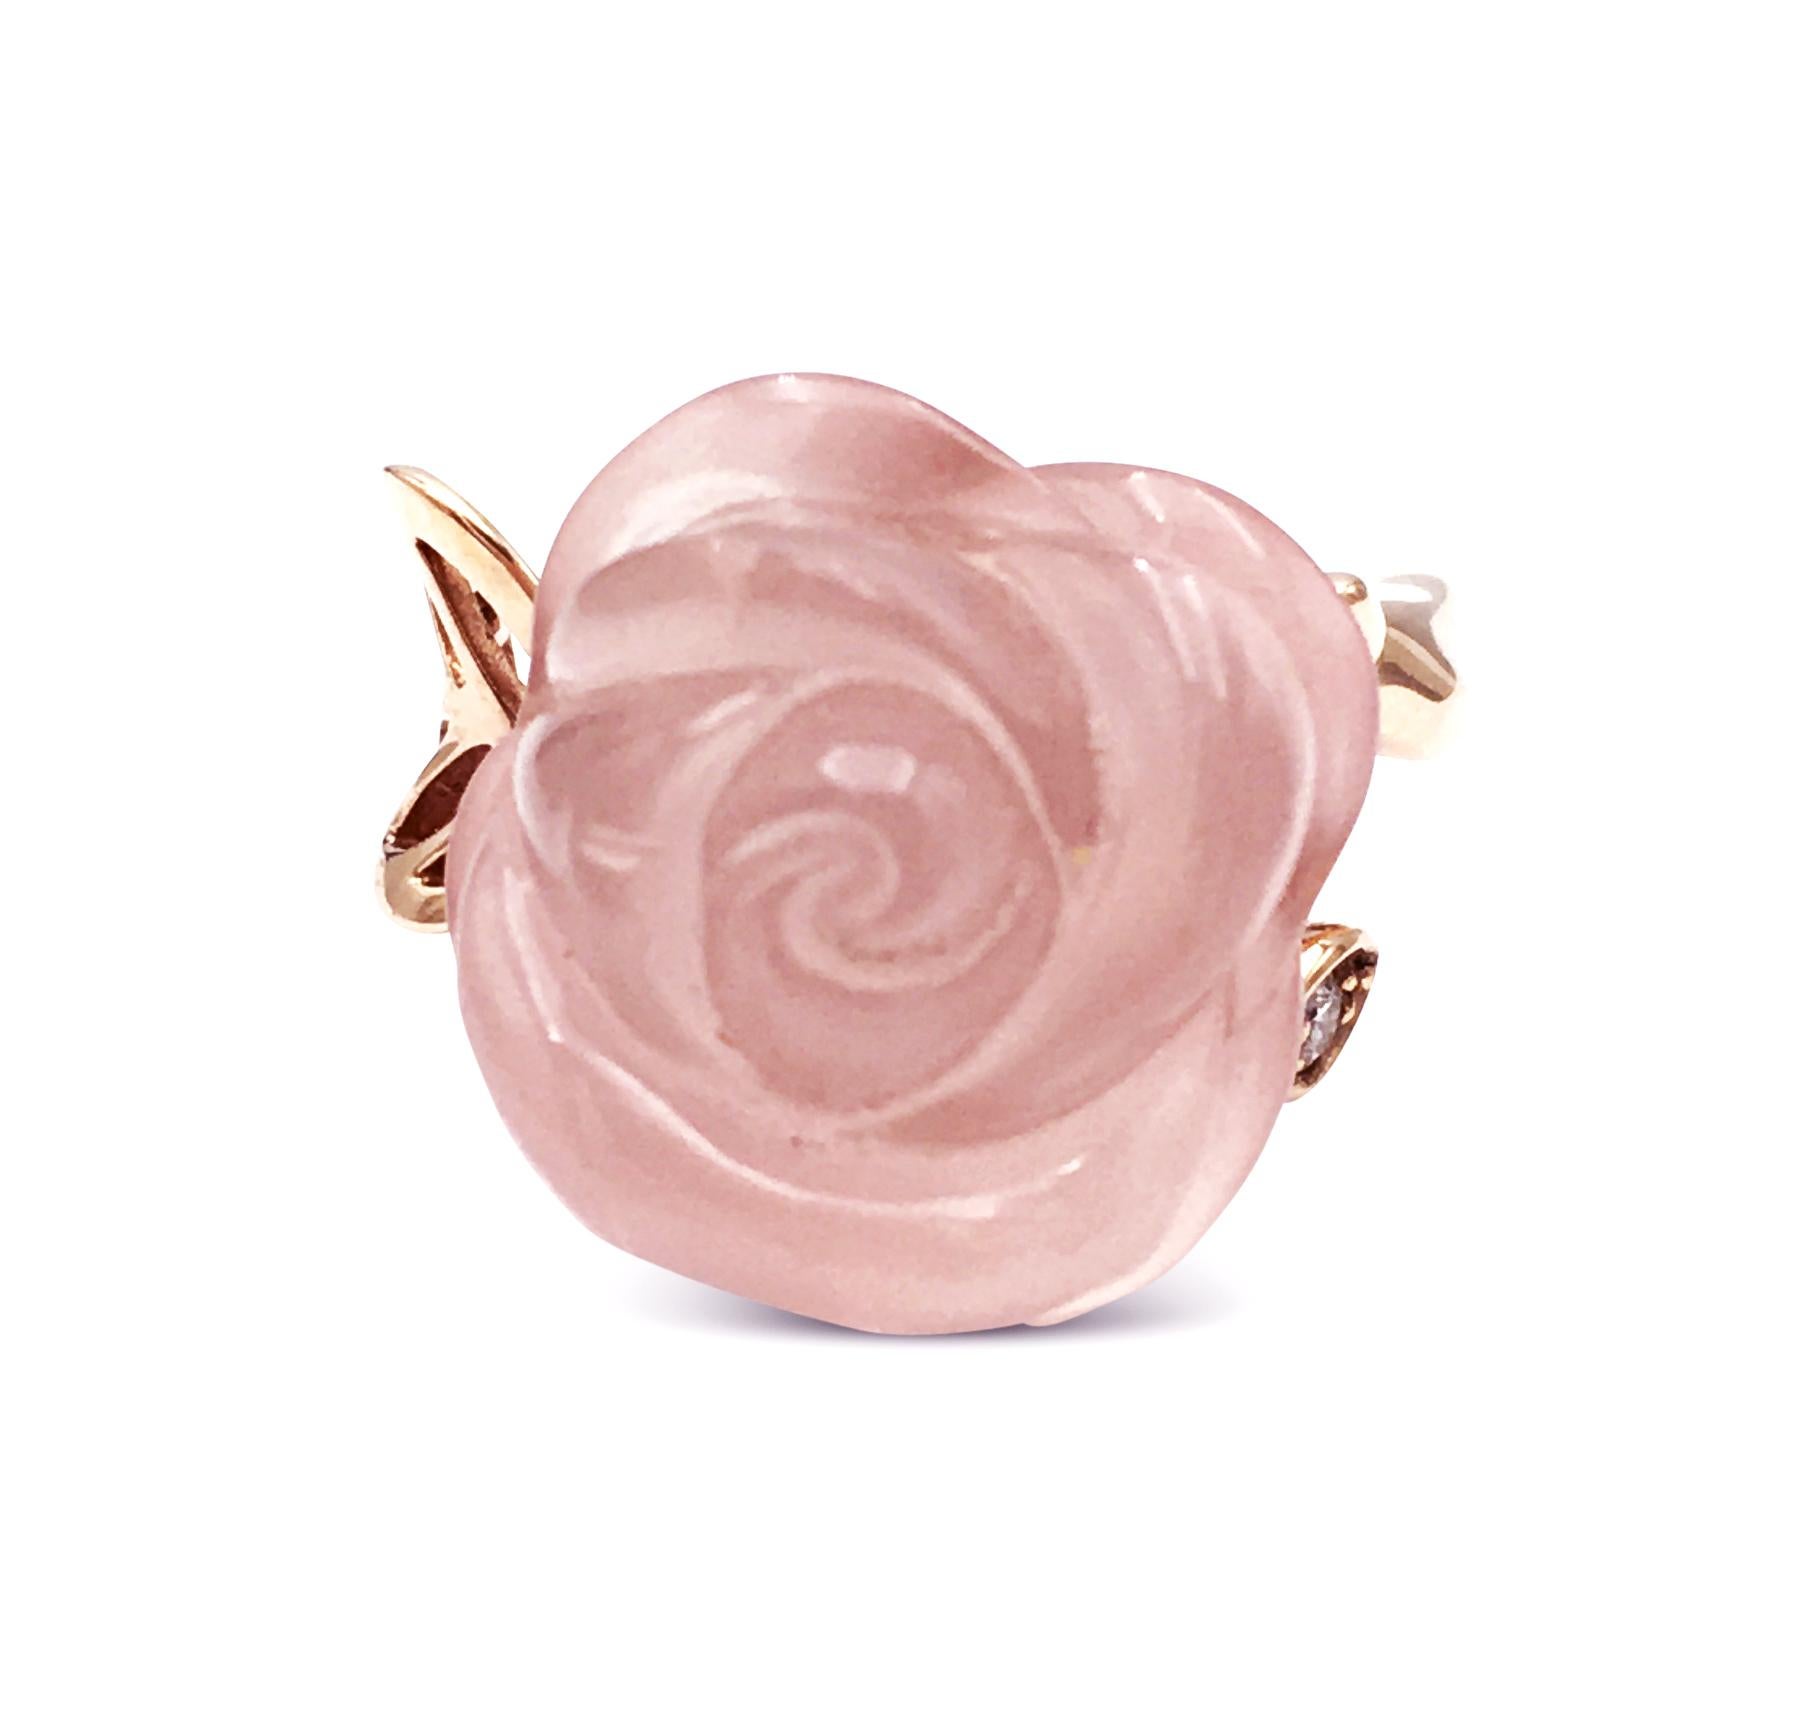 An authentic Christian Dior ring from the Rose Dior Pré Catalan collection. Centering on a hand carved rose quartz stone made to look like a crystalized rose and set with one diamond weighing approximately 0.03 carats. Signed Dior, AU 750. CIRCA